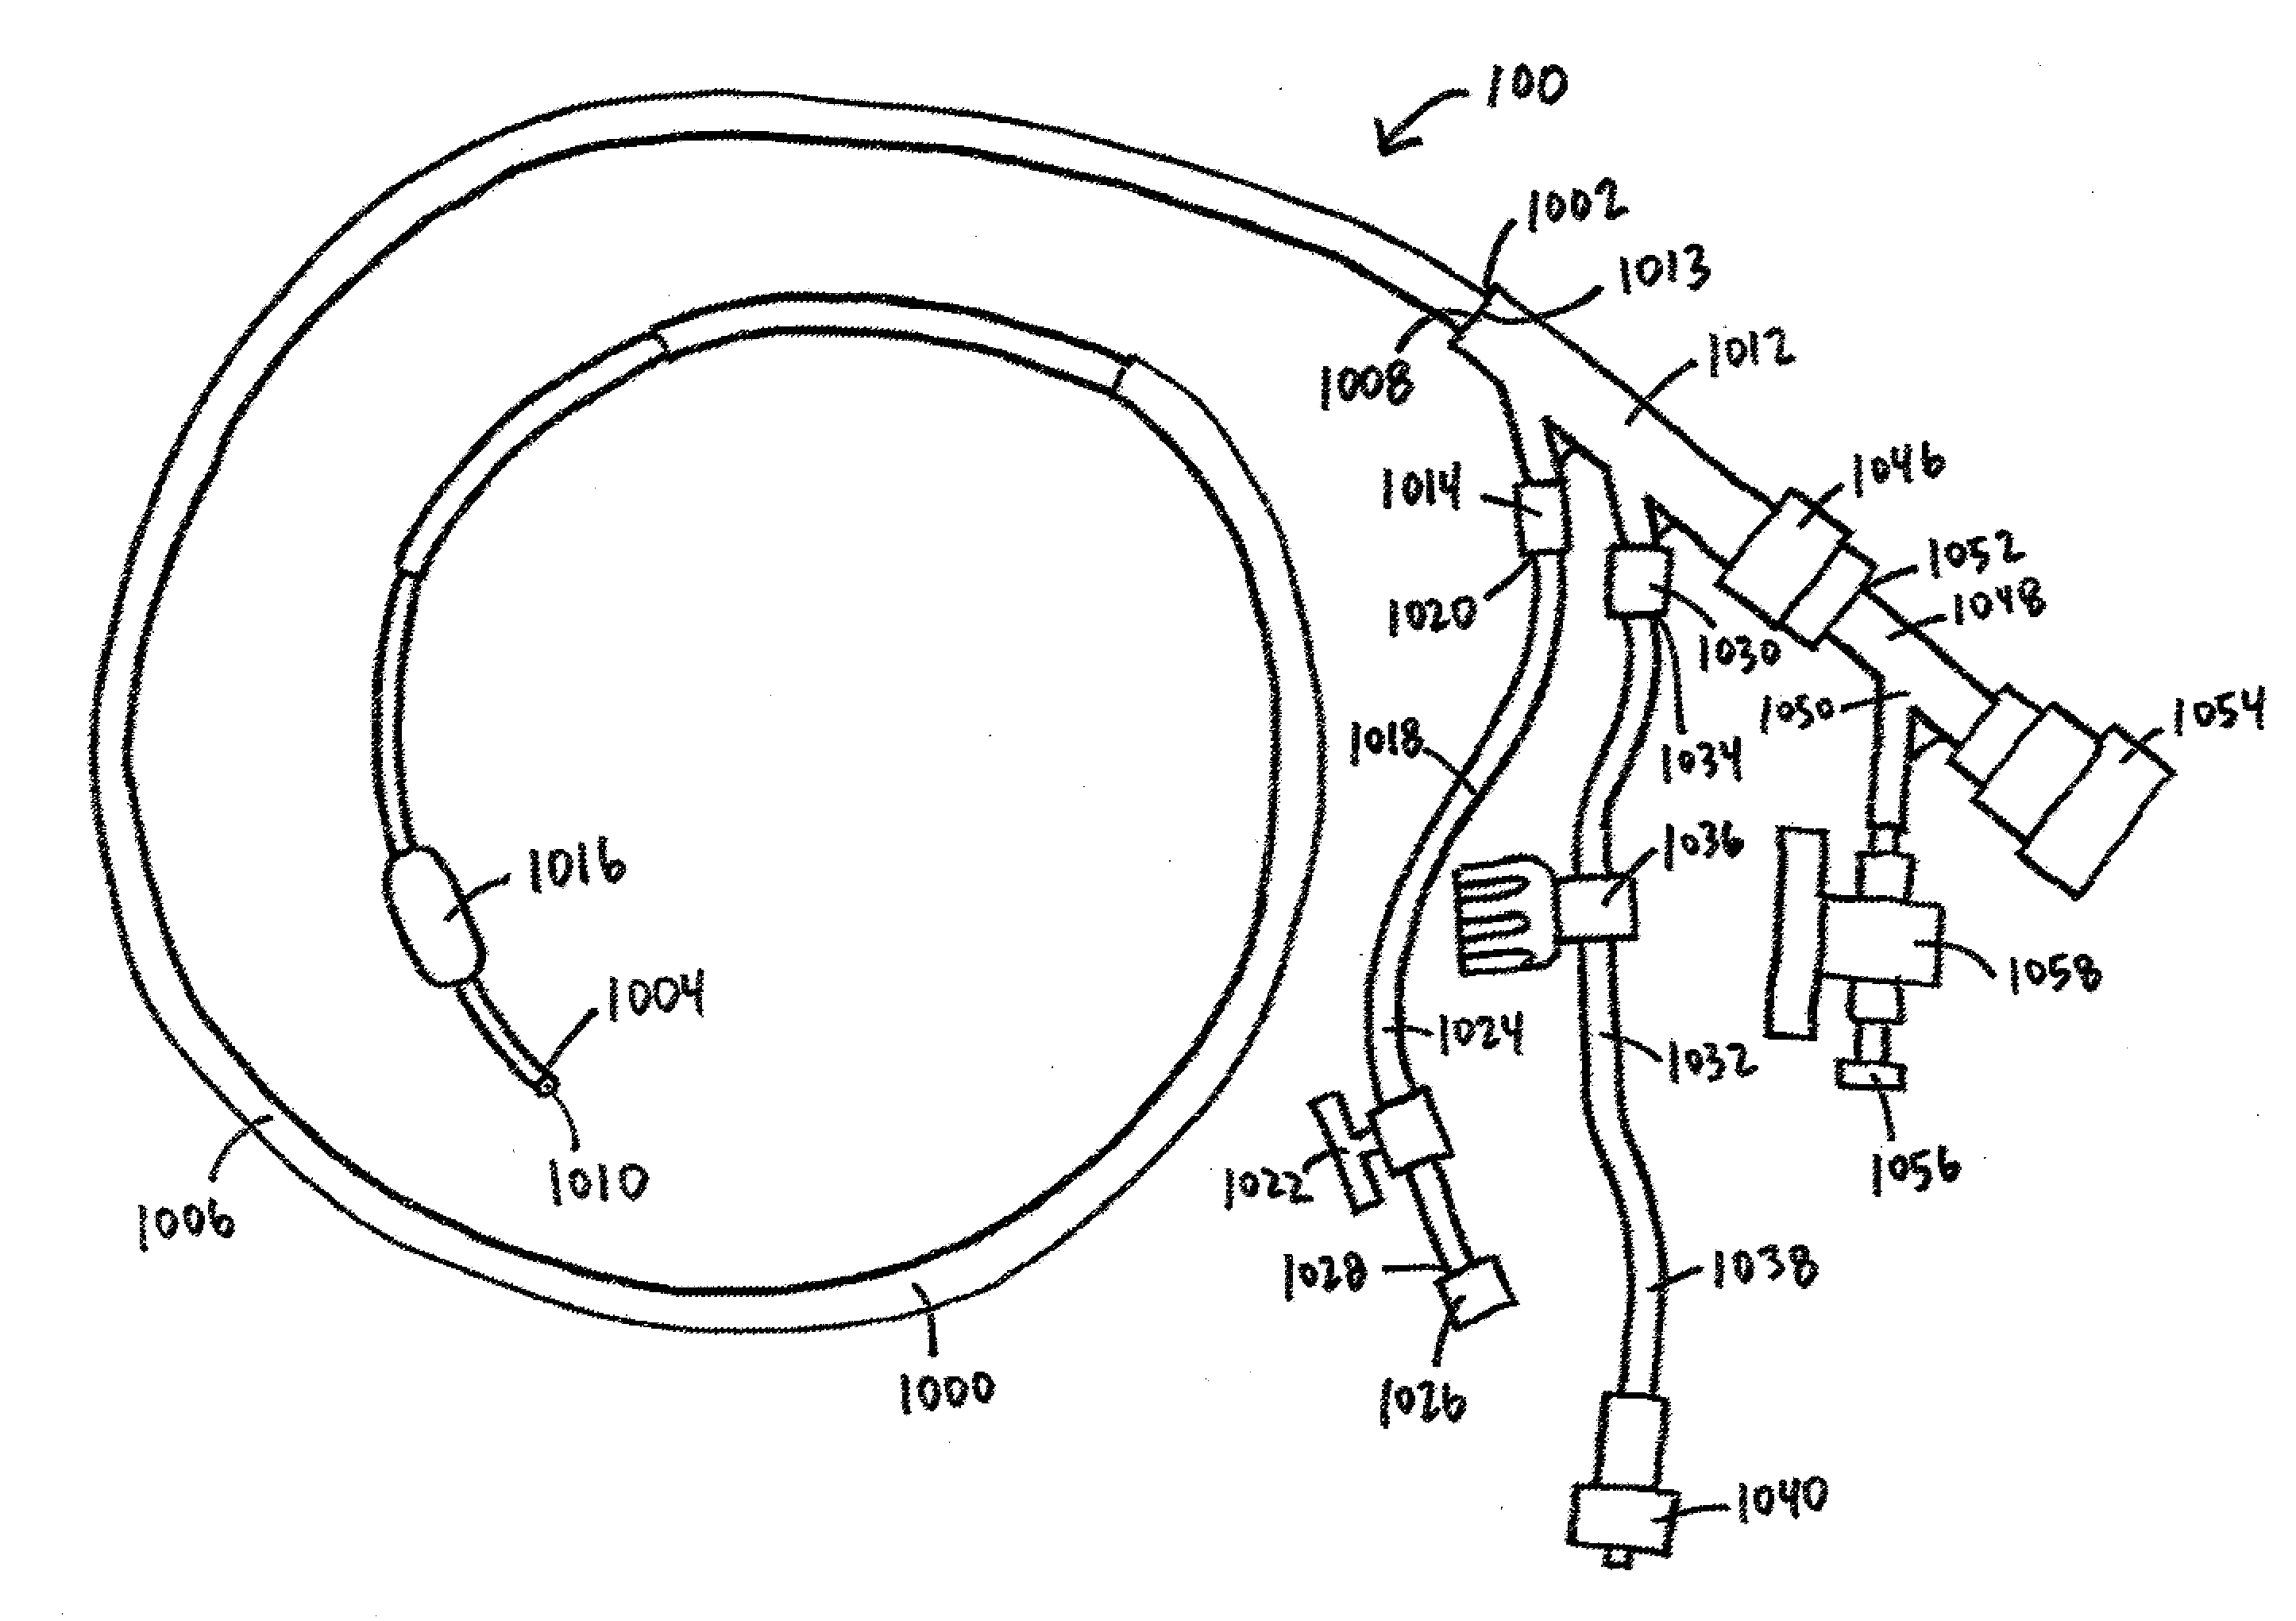 Devices, systems, and methods for organ retroperfusion